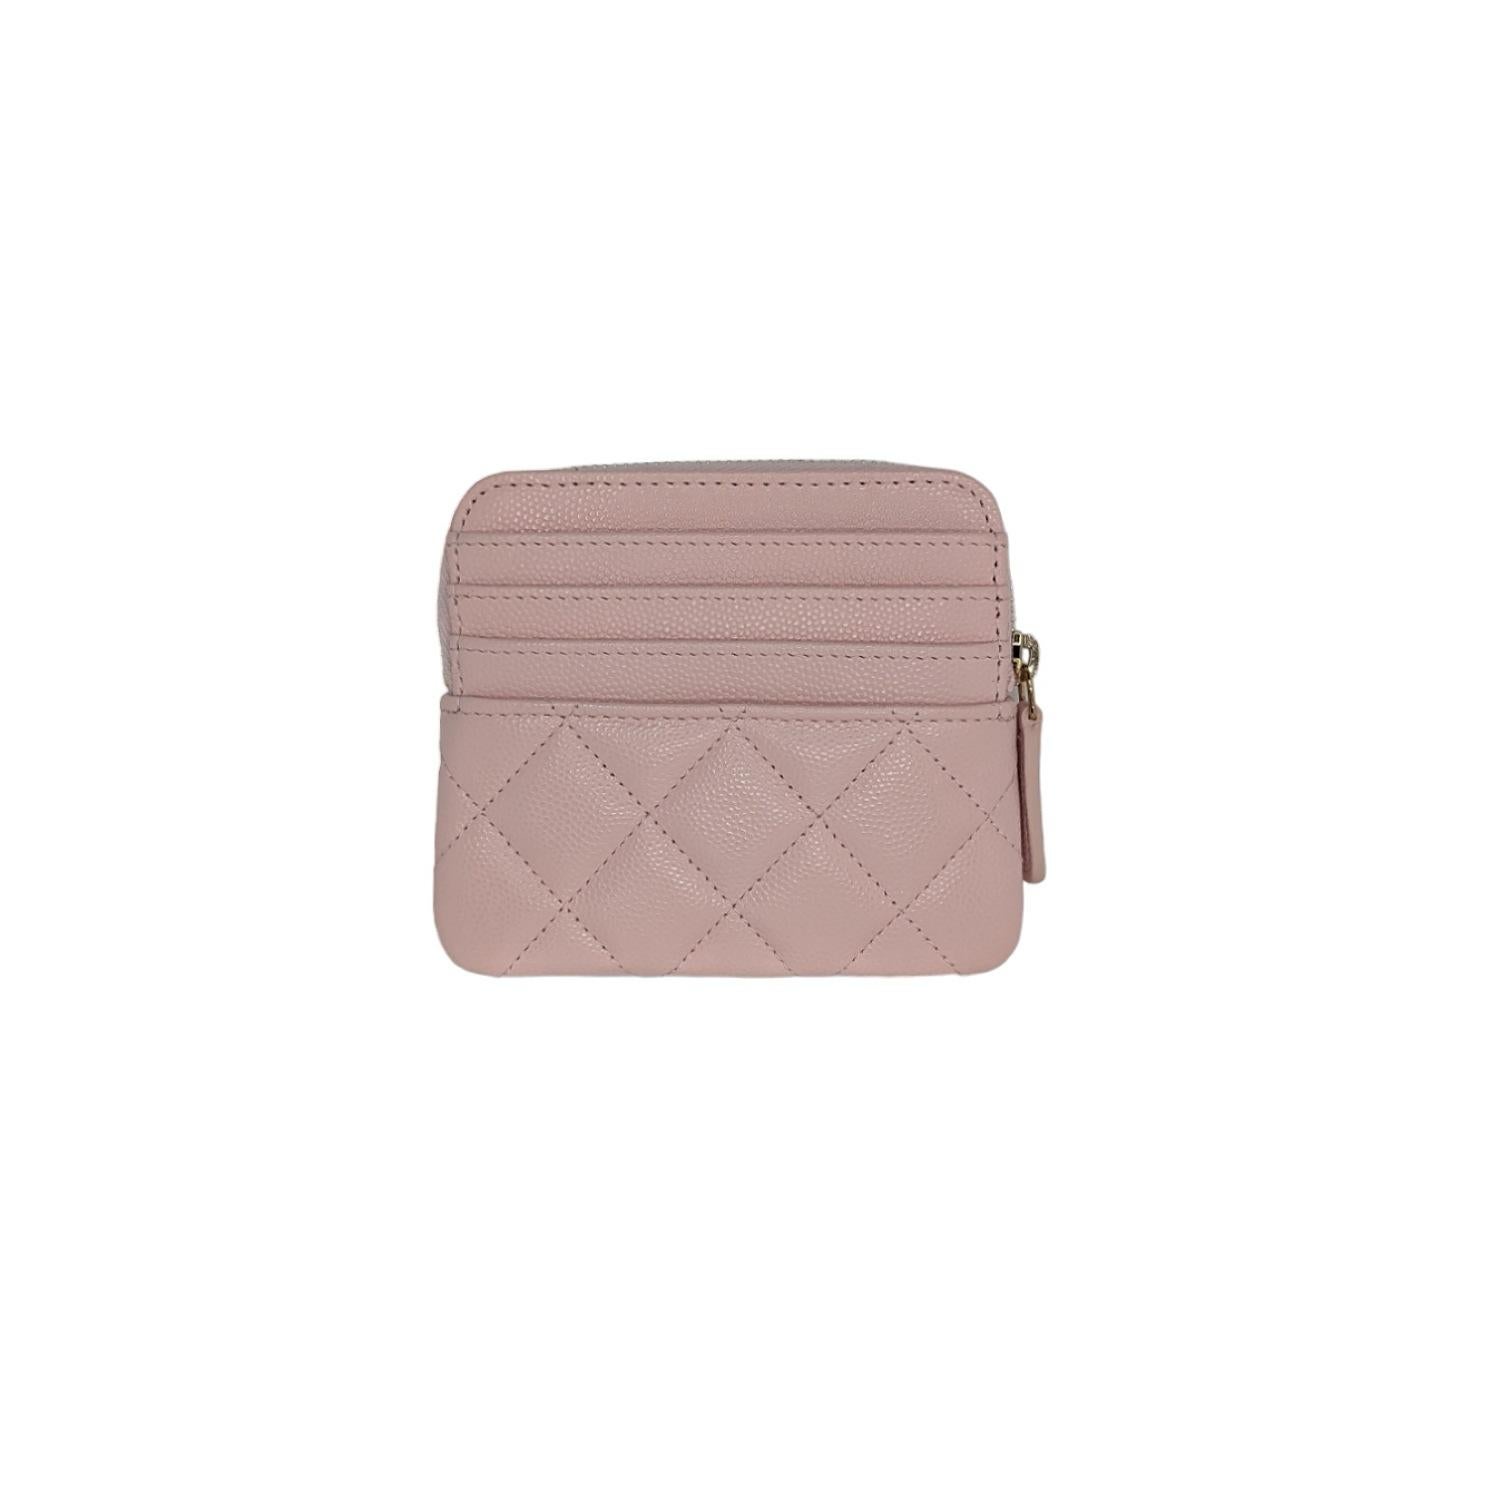 This ultra-stylish card holder is crafted of luxurious diamond quilted caviar leather in pink with a crystal-embellished leather threaded gold chain Chanel CC on the face. The zipper opens to a pink fabric interior and there are card slots on either